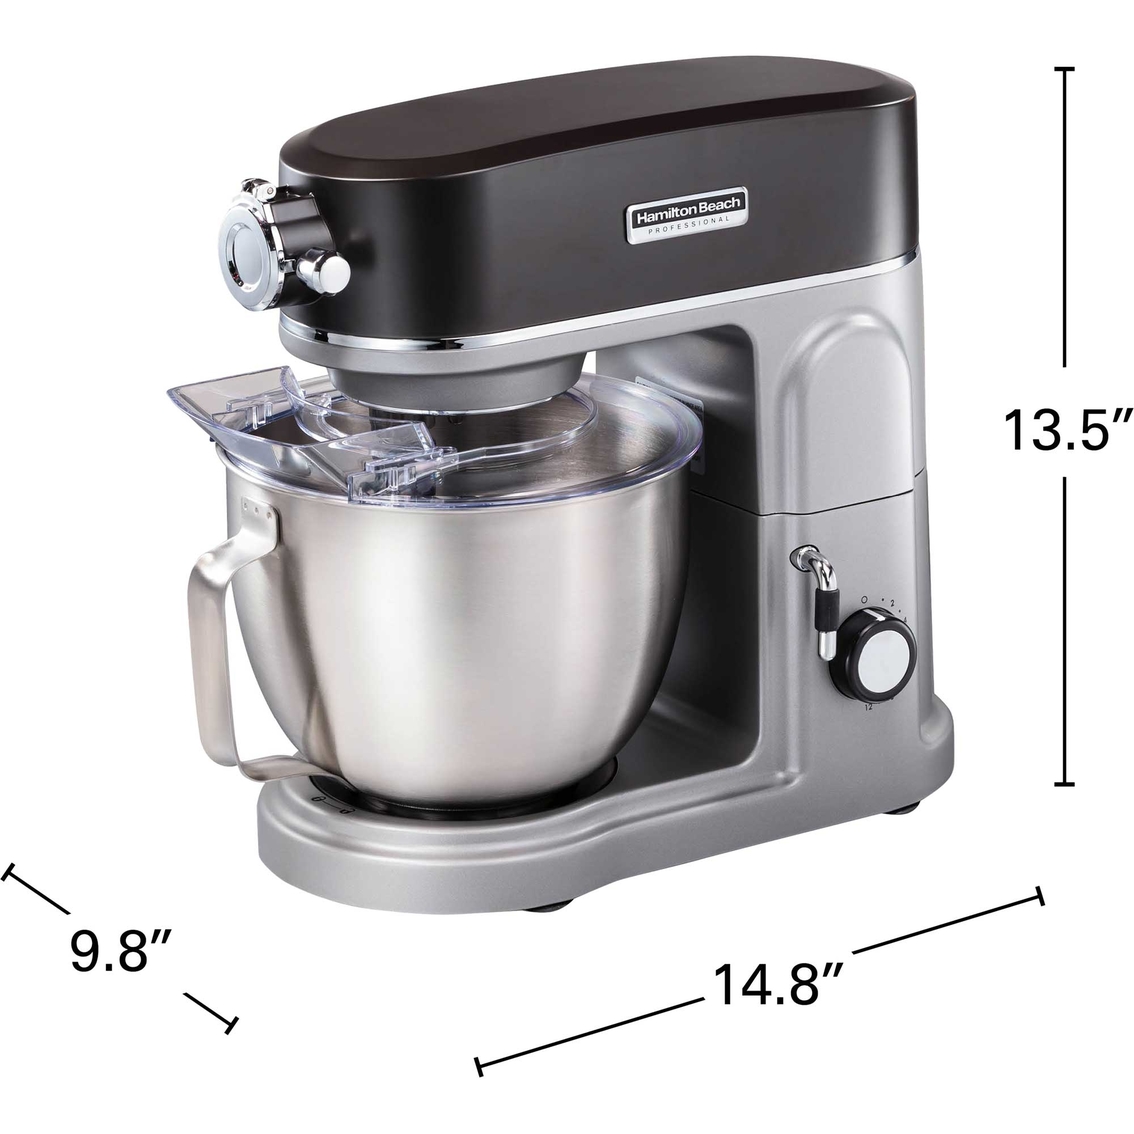 Hamilton Beach Professional All Metal Stand Mixer - Image 7 of 7